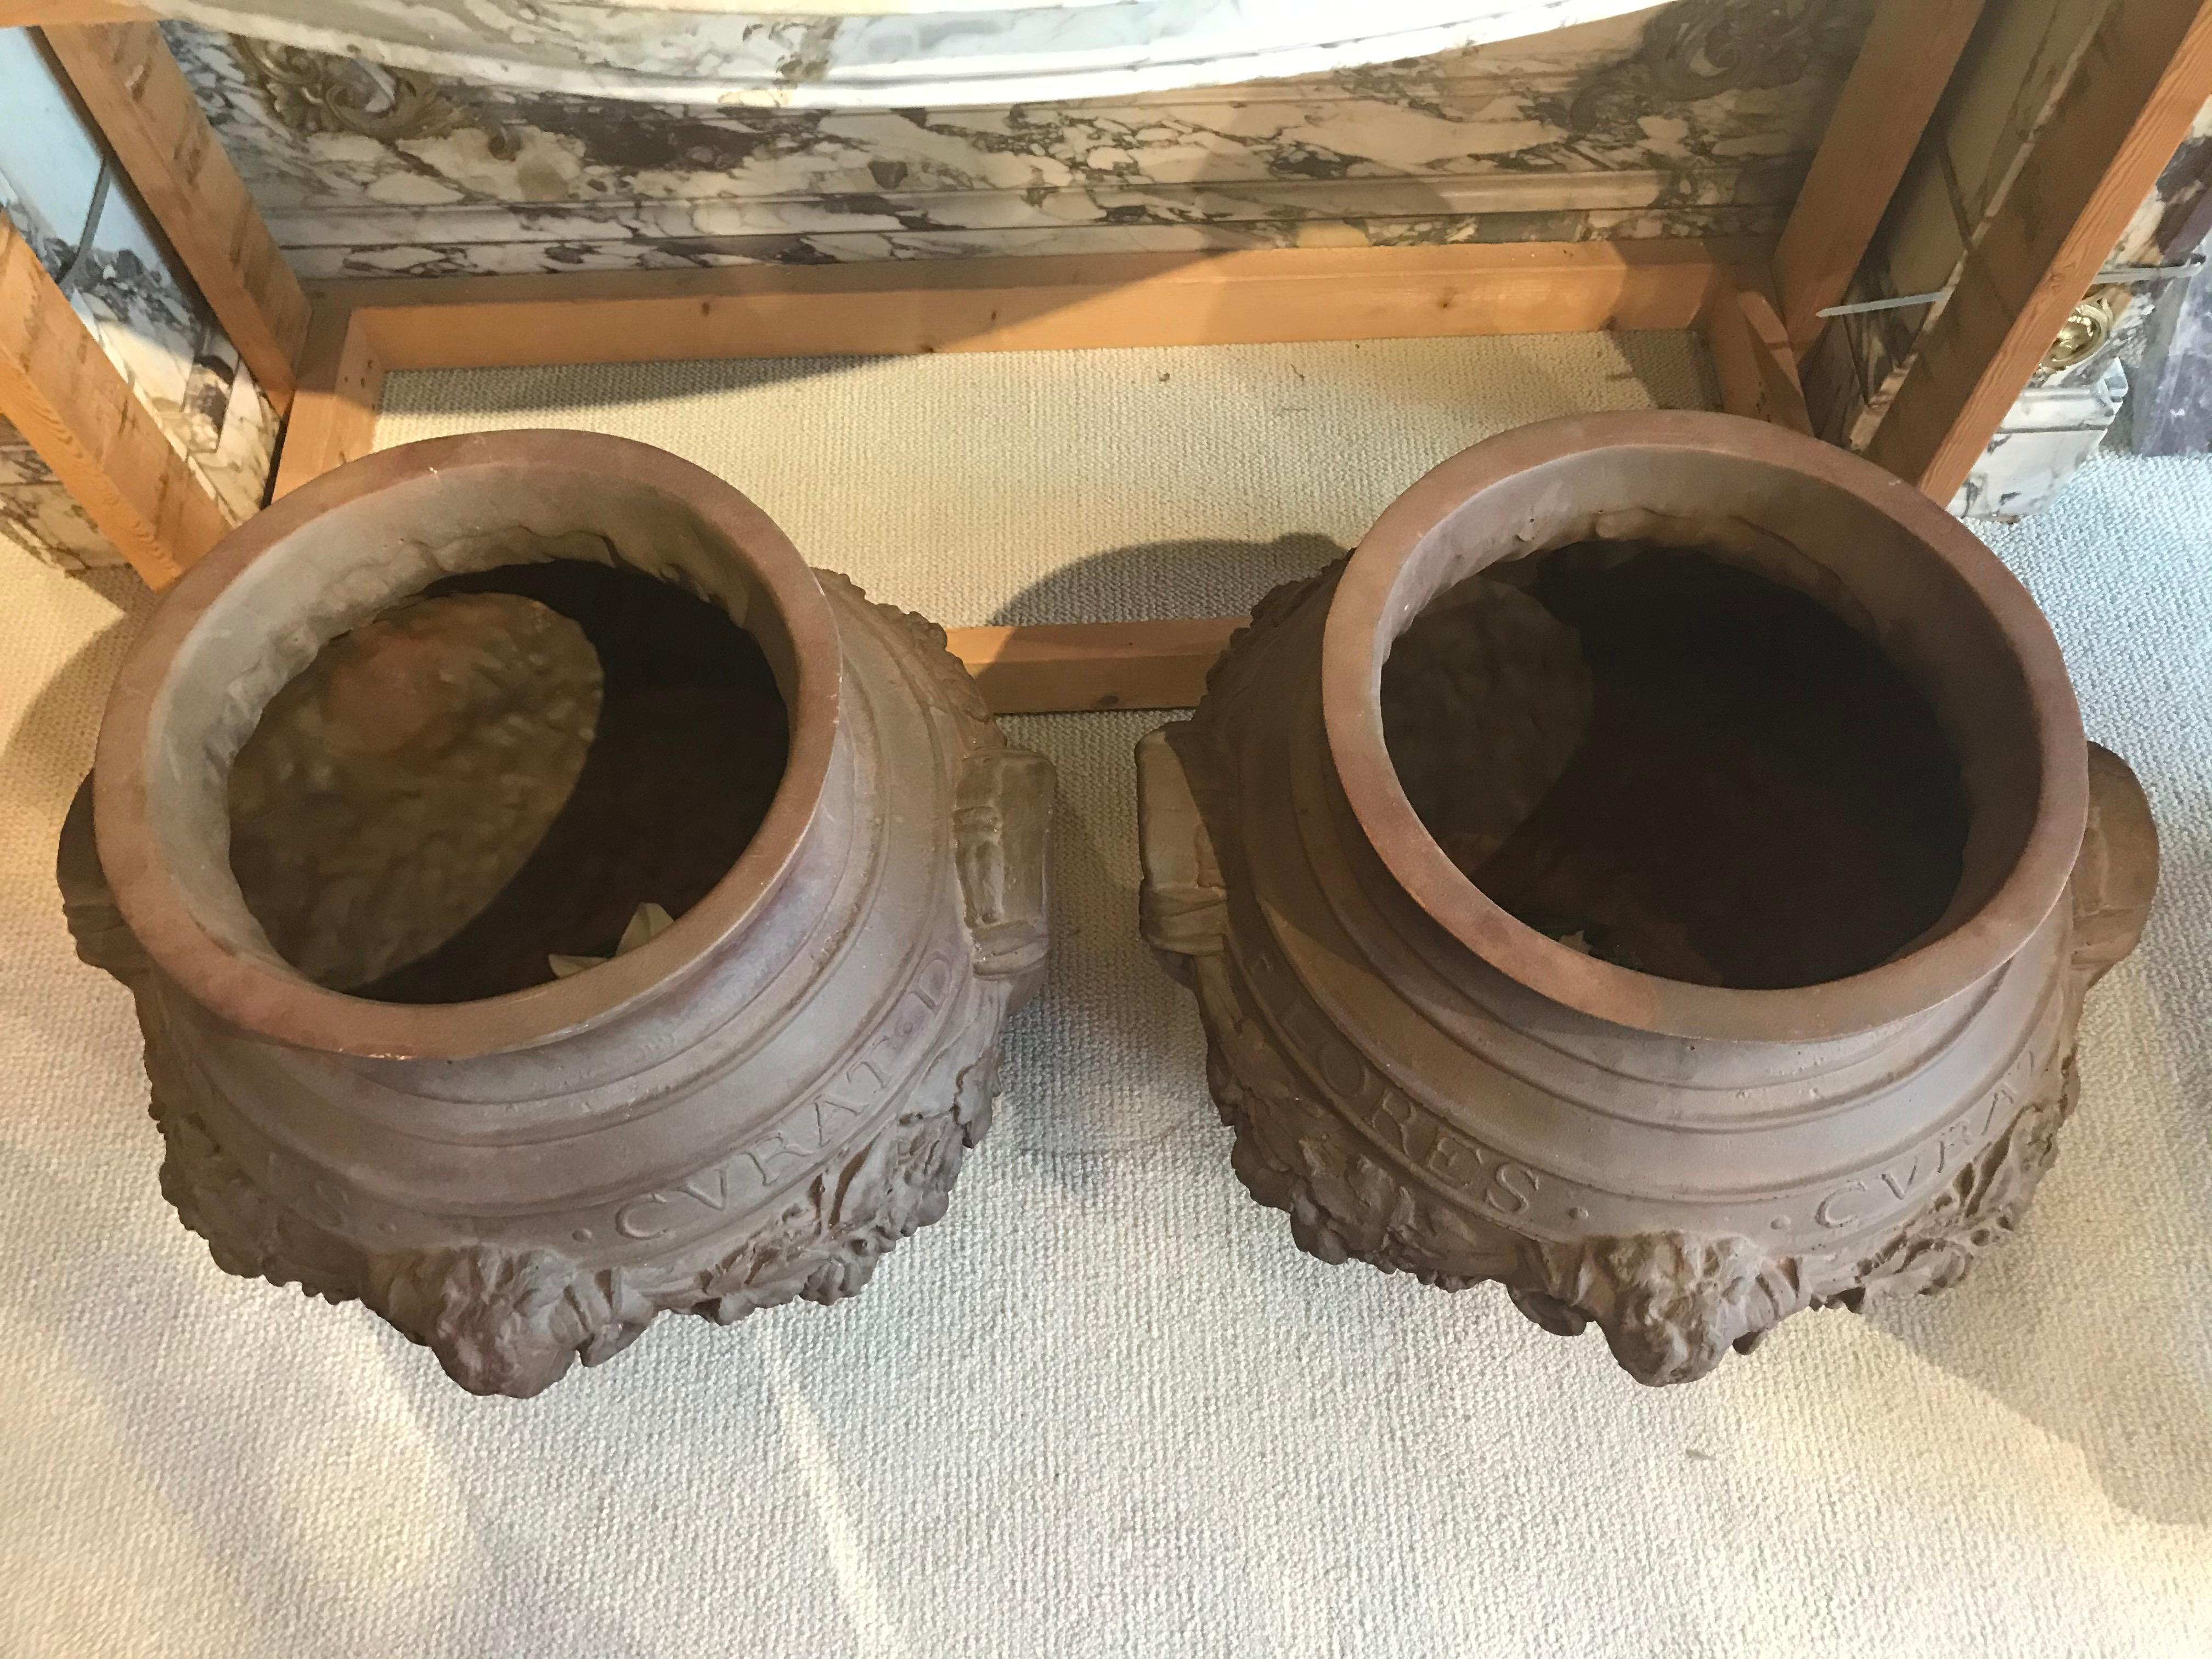 Pair of reproduction planters. Resin, circa, 1970
Dimensions: Height 23 1/2